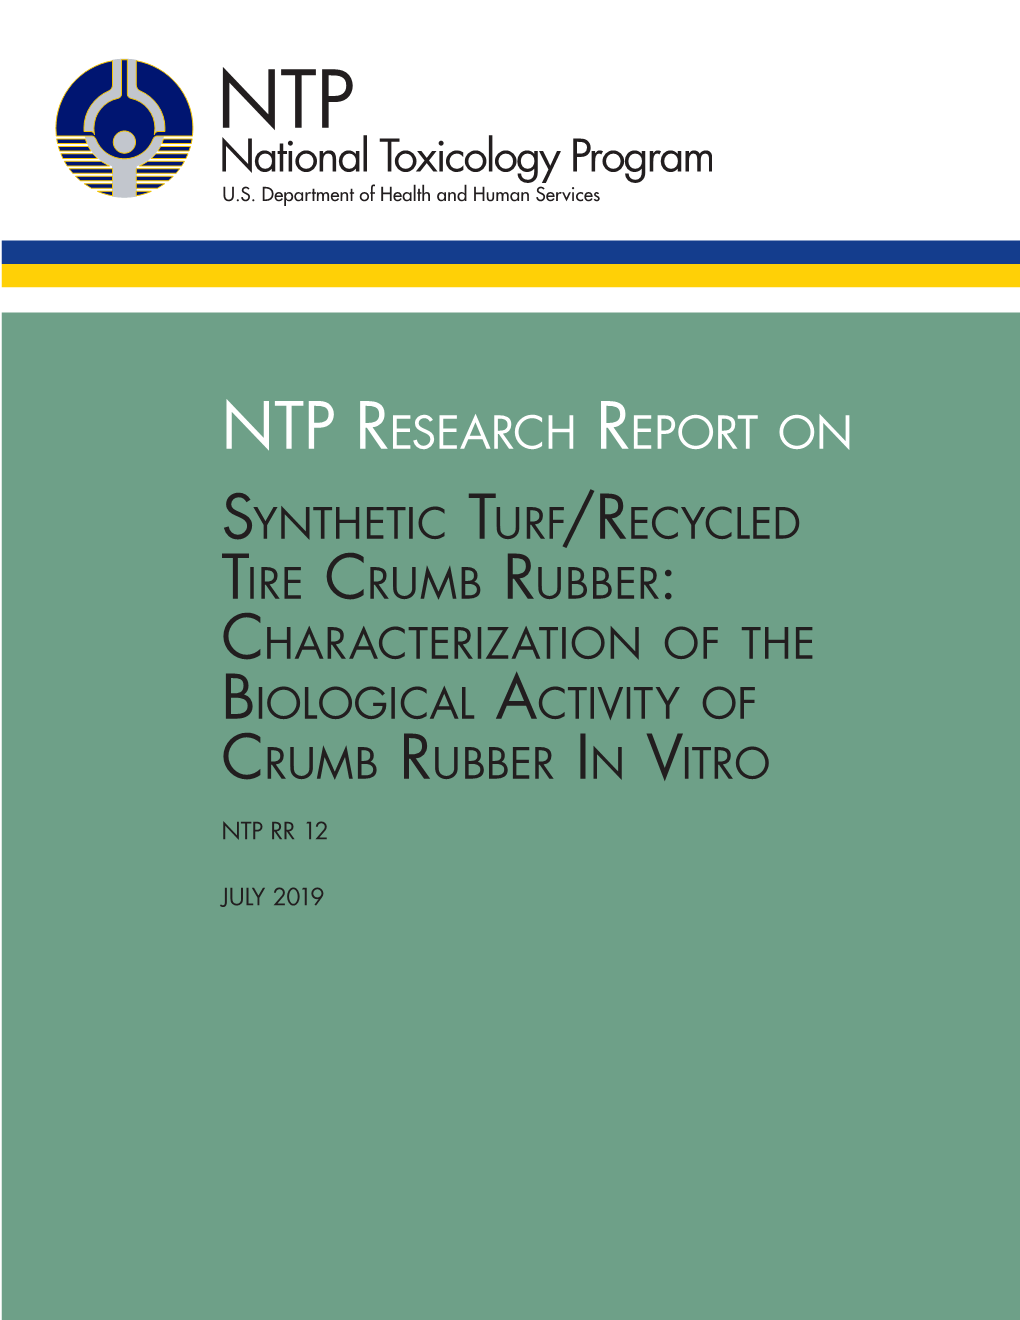 Synthetic Turf/Recycled Tire Crumb Rubber: Characterization of the Biological Activity of Crumb Rubber in Vitro